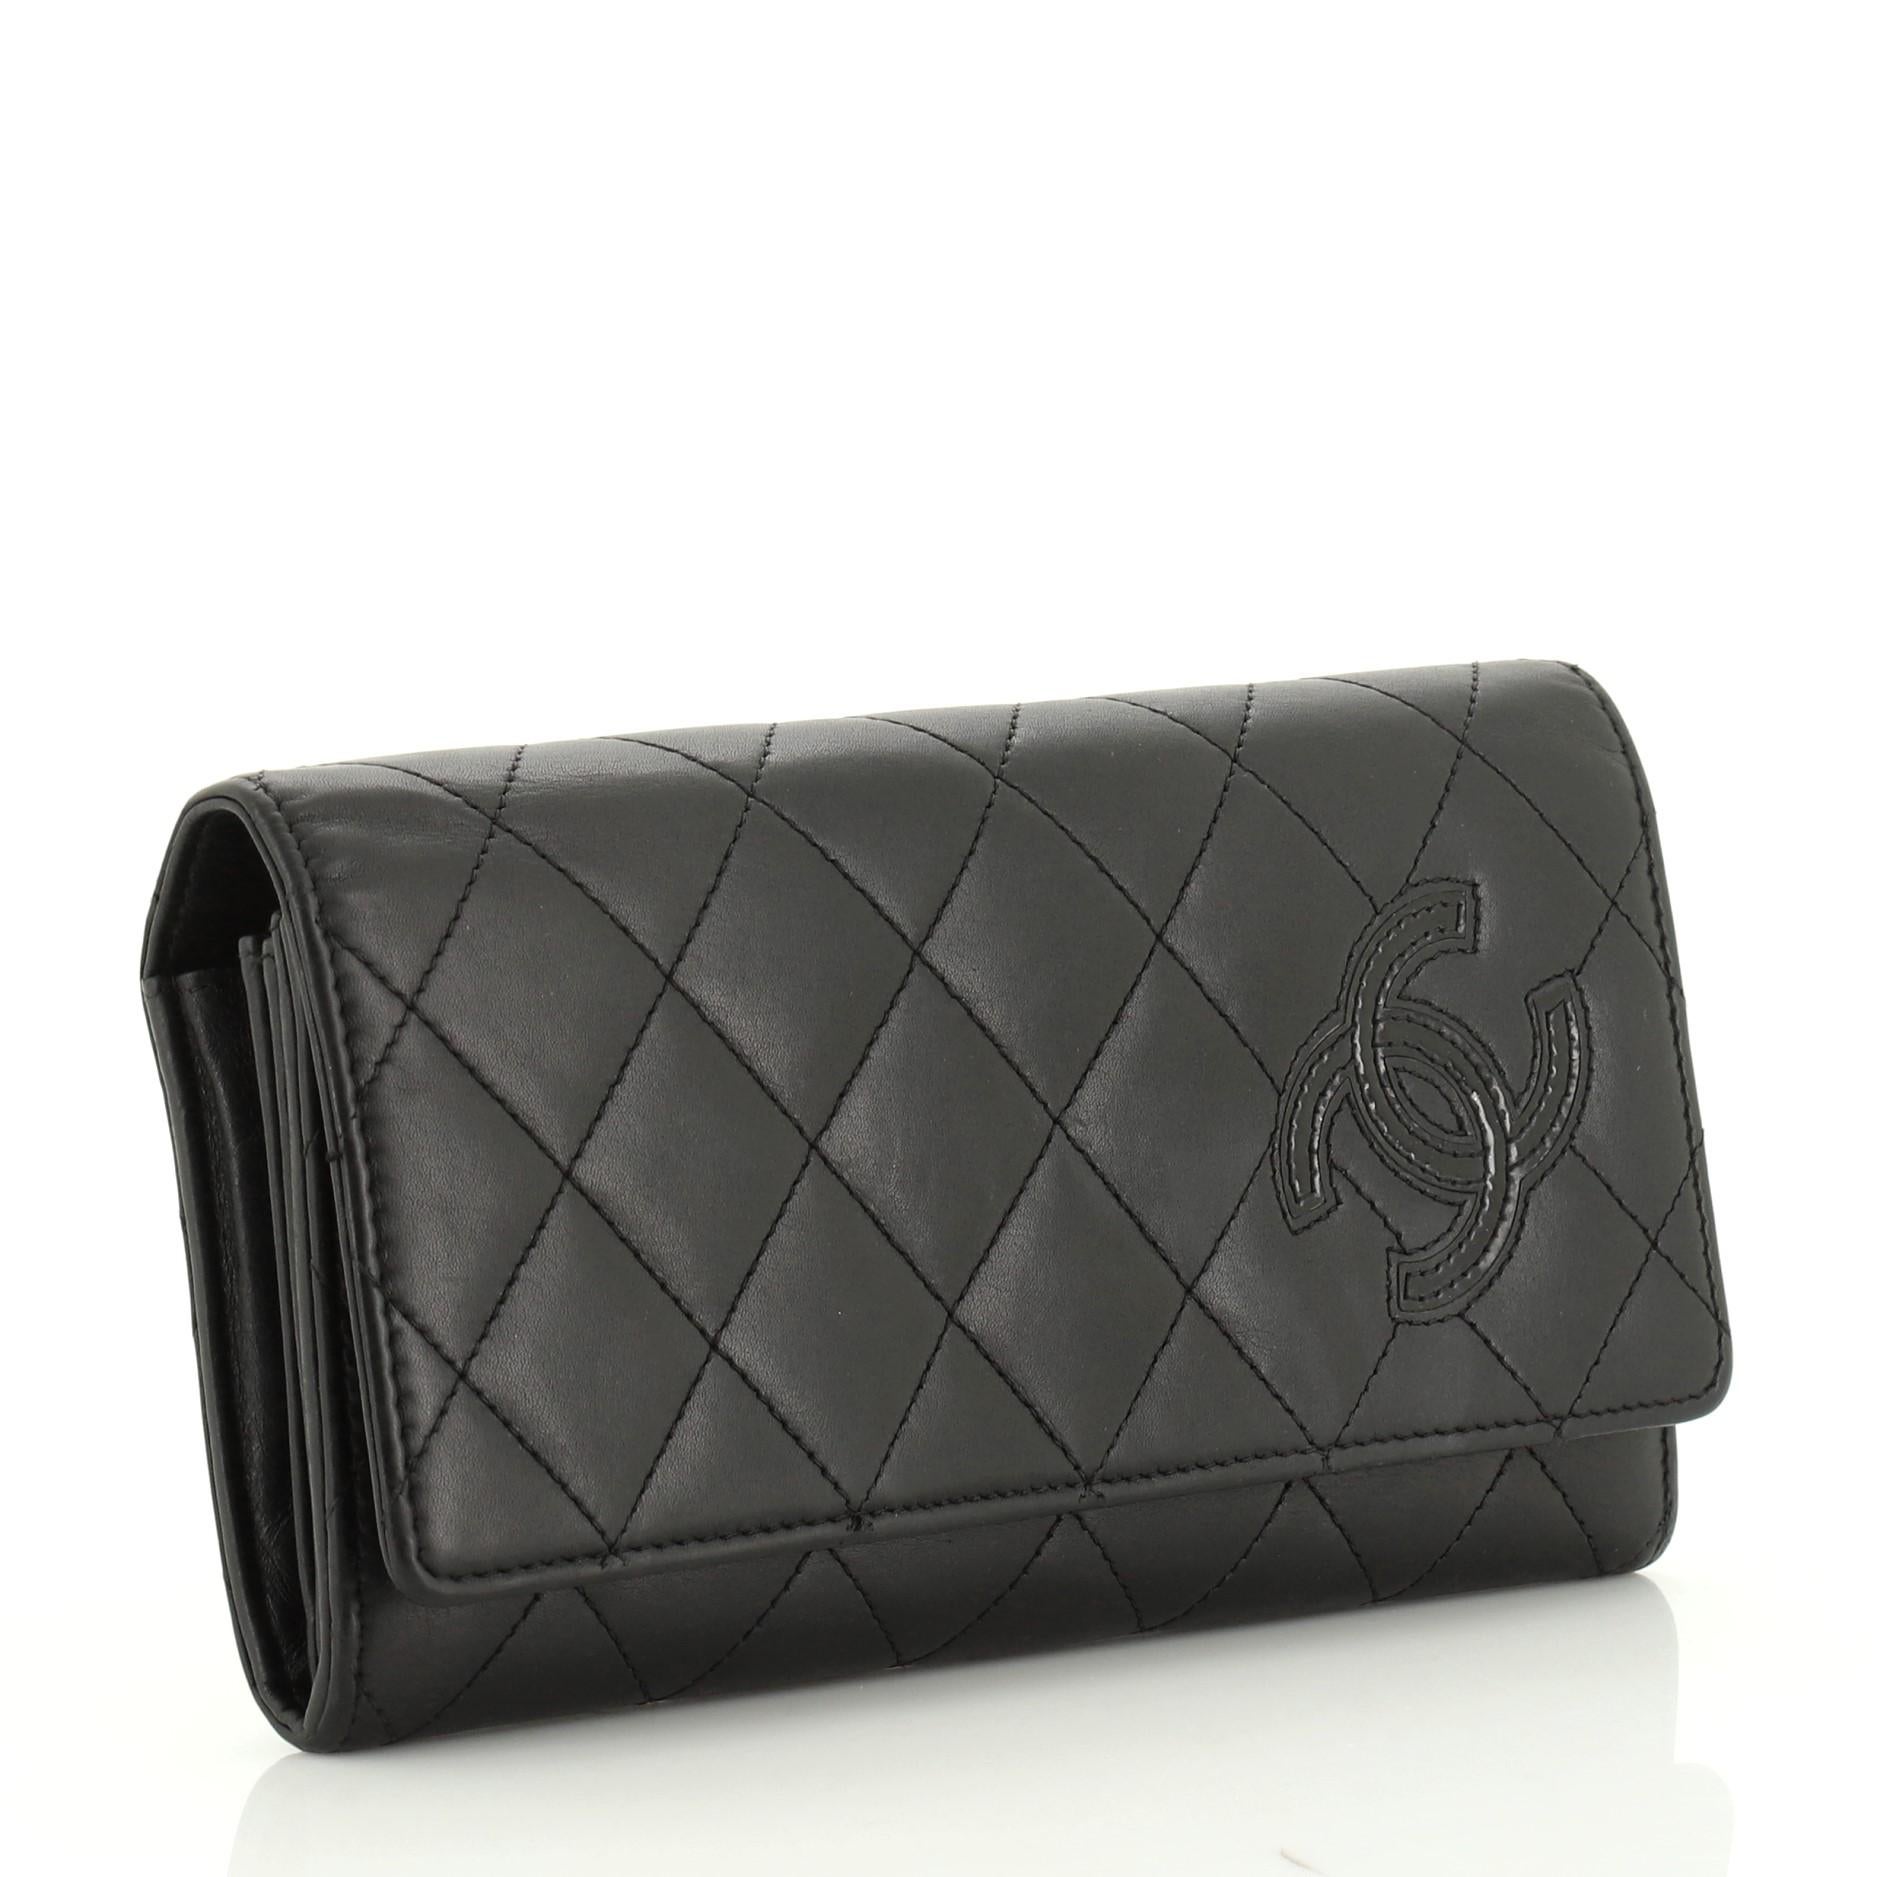 This Chanel CC Flap Wallet Quilted Lambskin Long, crafted in black quilted lambskin leather, features interlocking CC logo, gusseted sides, and silver-tone hardware. Its snap button closure opens to a black leather and fabric interior with multiple